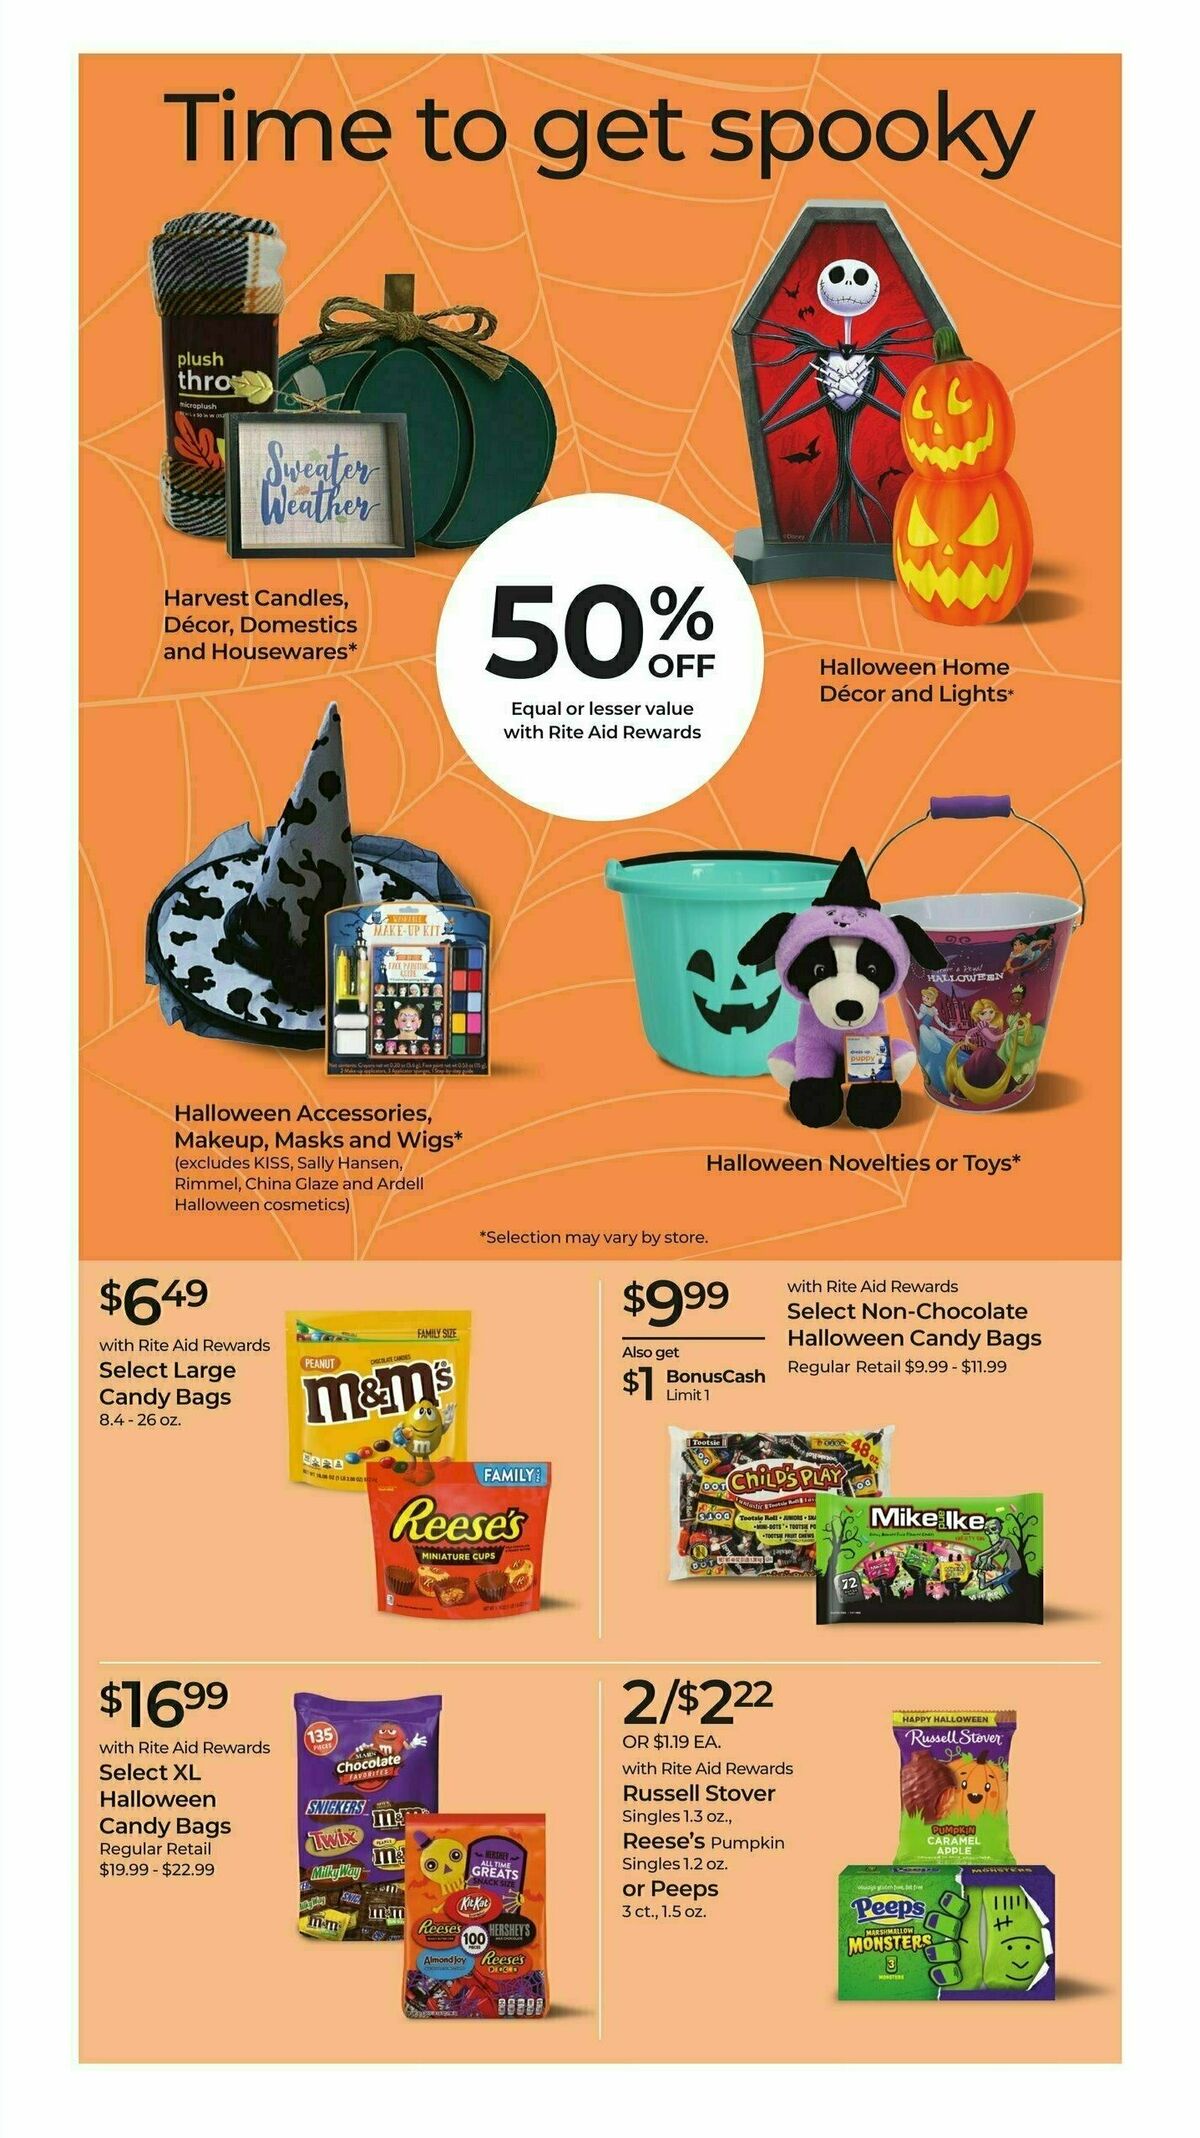 Rite Aid Weekly Ad from October 15